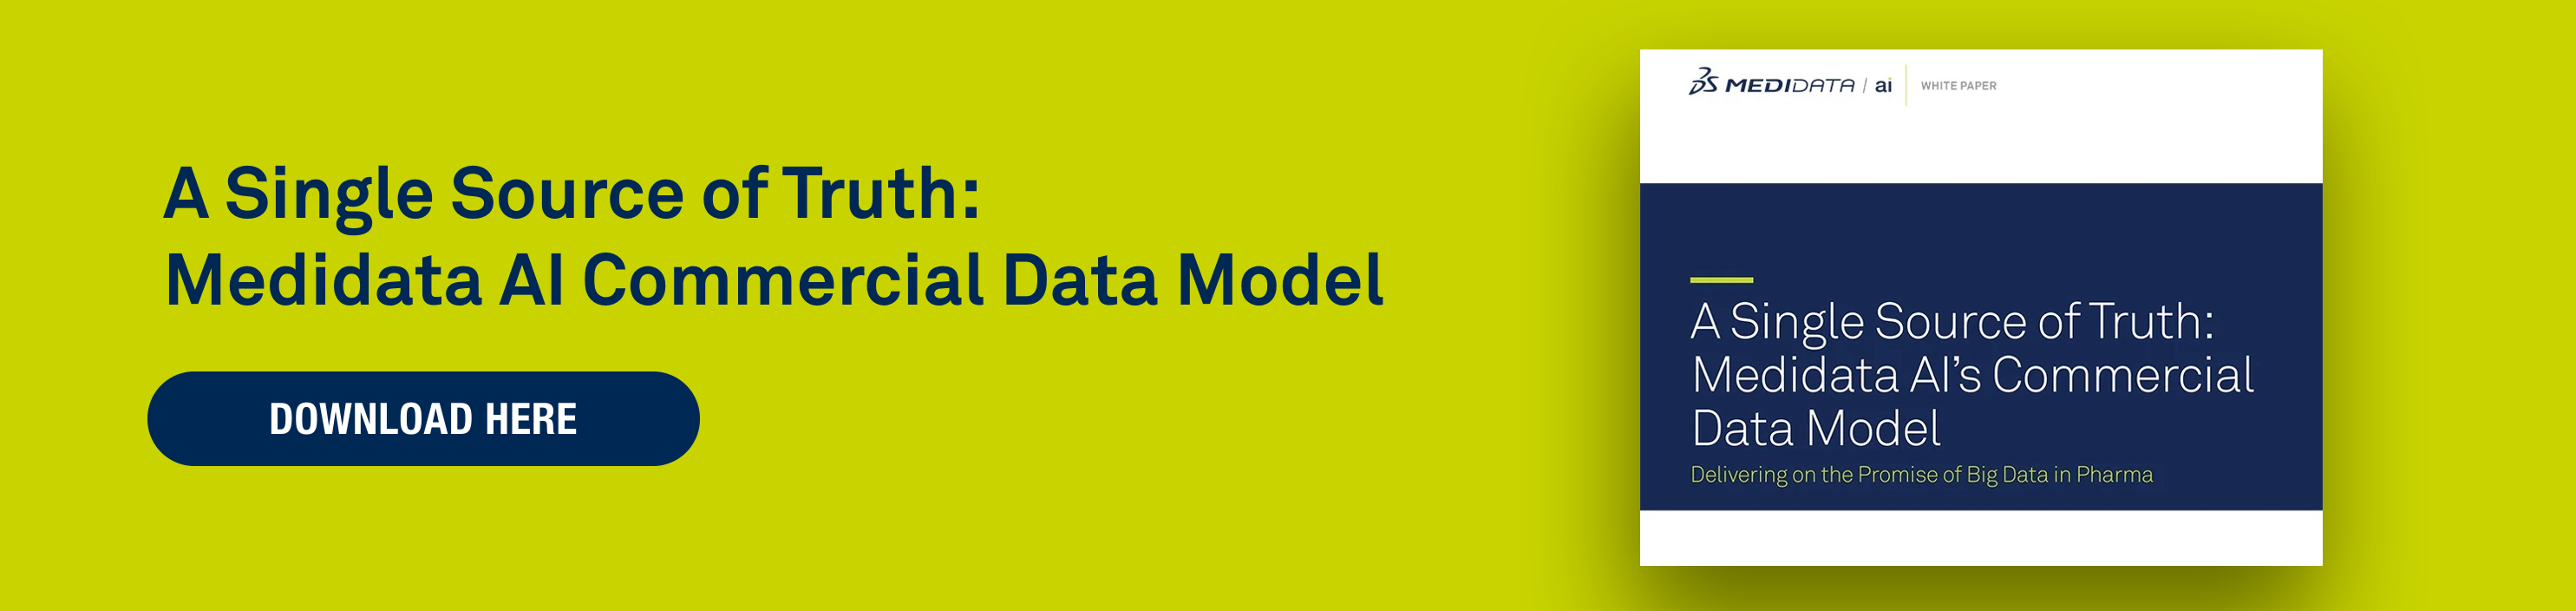 A Single Source of Truth: Medidata AI’s Commercial Data Model